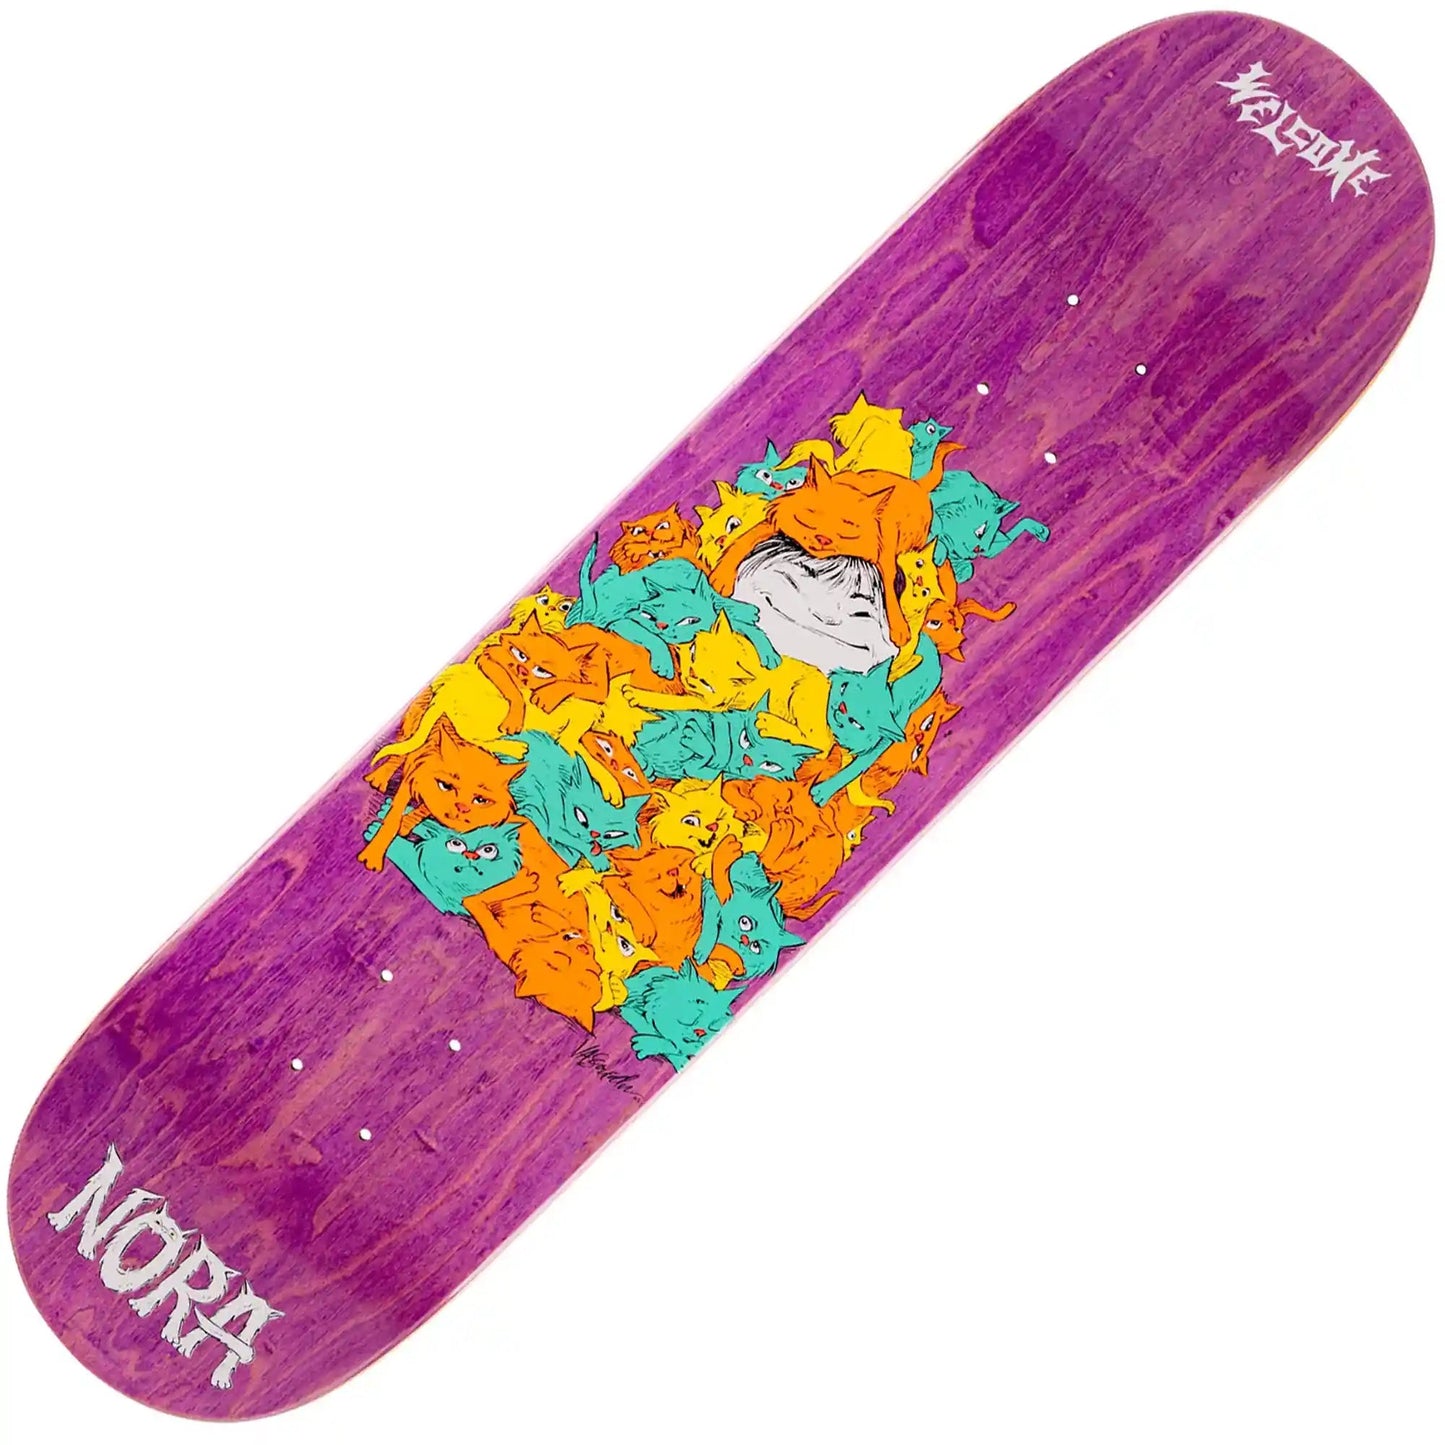 Welcome Purr Pile Nora Pro Model Deck (7.75"), purple stain - Tiki Room Skateboards - 1